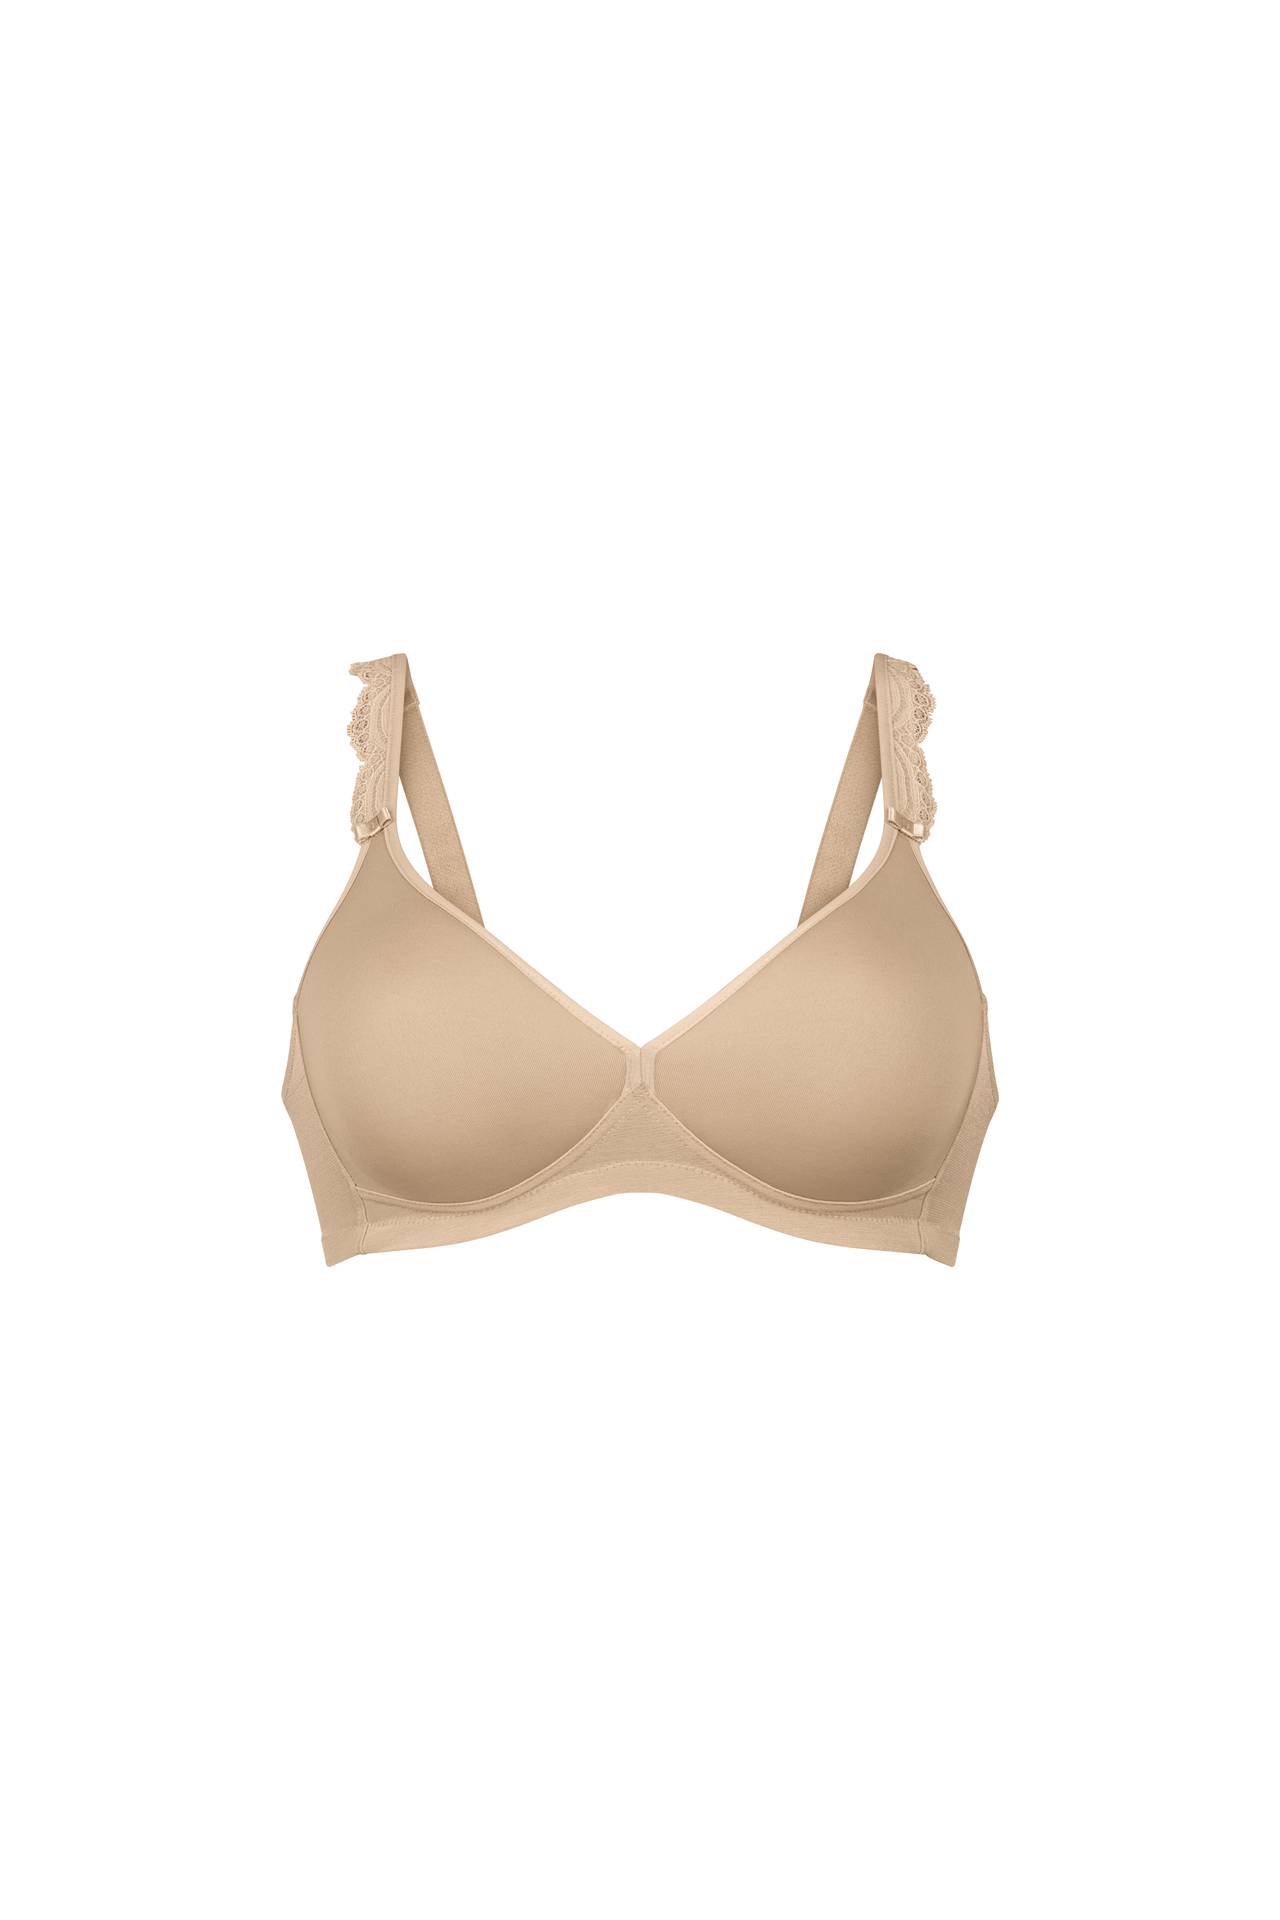 Selma- Rosa Faia Soft Bra 5631 with Spacer Cups - White – The